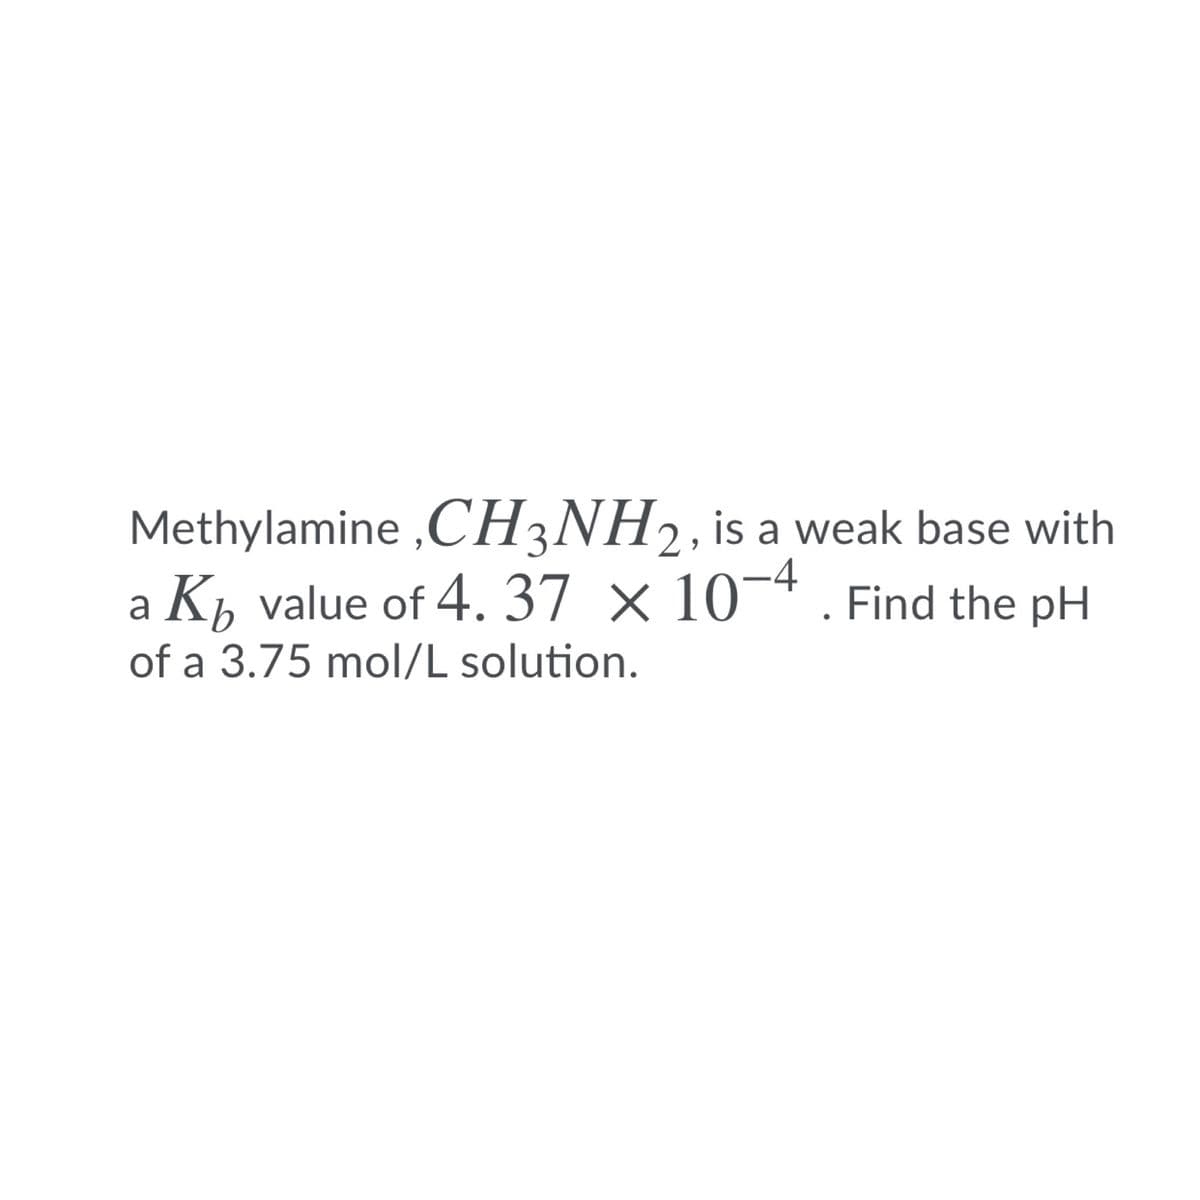 Methylamine ,CH3NH2, is a weak base with
a K, value of 4. 37 × 10¬* . Find the pH
of a 3.75 mol/L solution.
